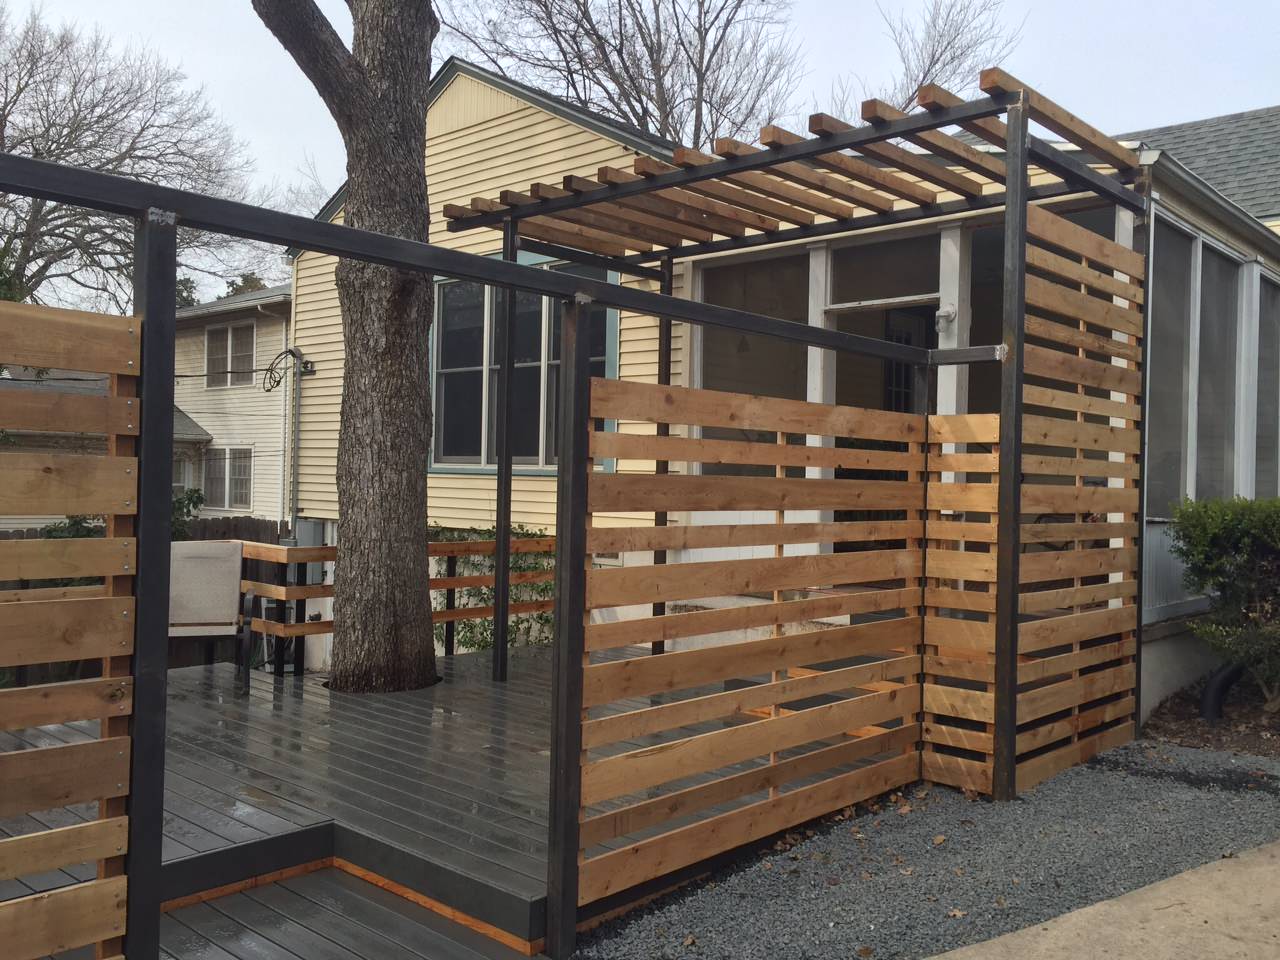 Modern composite decking, 2" steel posts w/ cedar fencing and canopy